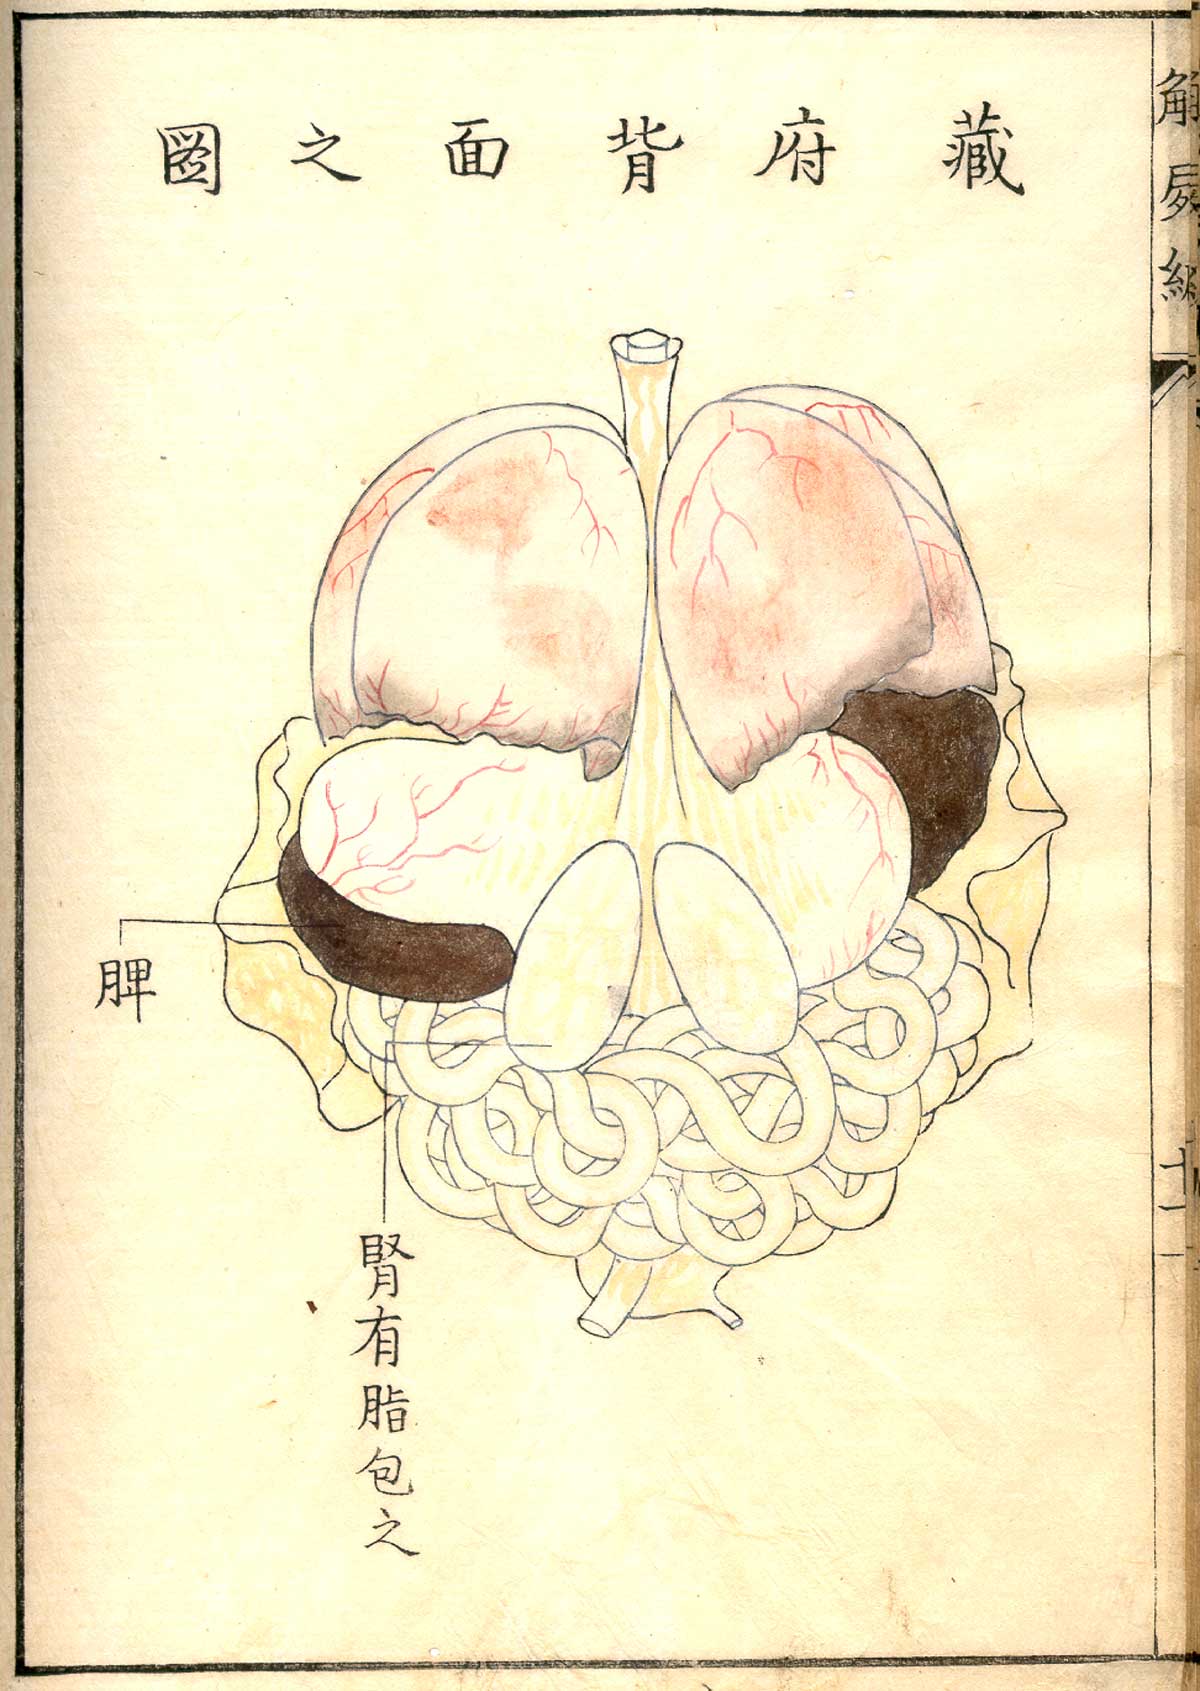 Hand colored woodcut of the internal organs viewed from the rear with lungs and heart at top, stomach and liver in the middle and intestines and bladder at the bottom with Japanese text describing some of the structures.